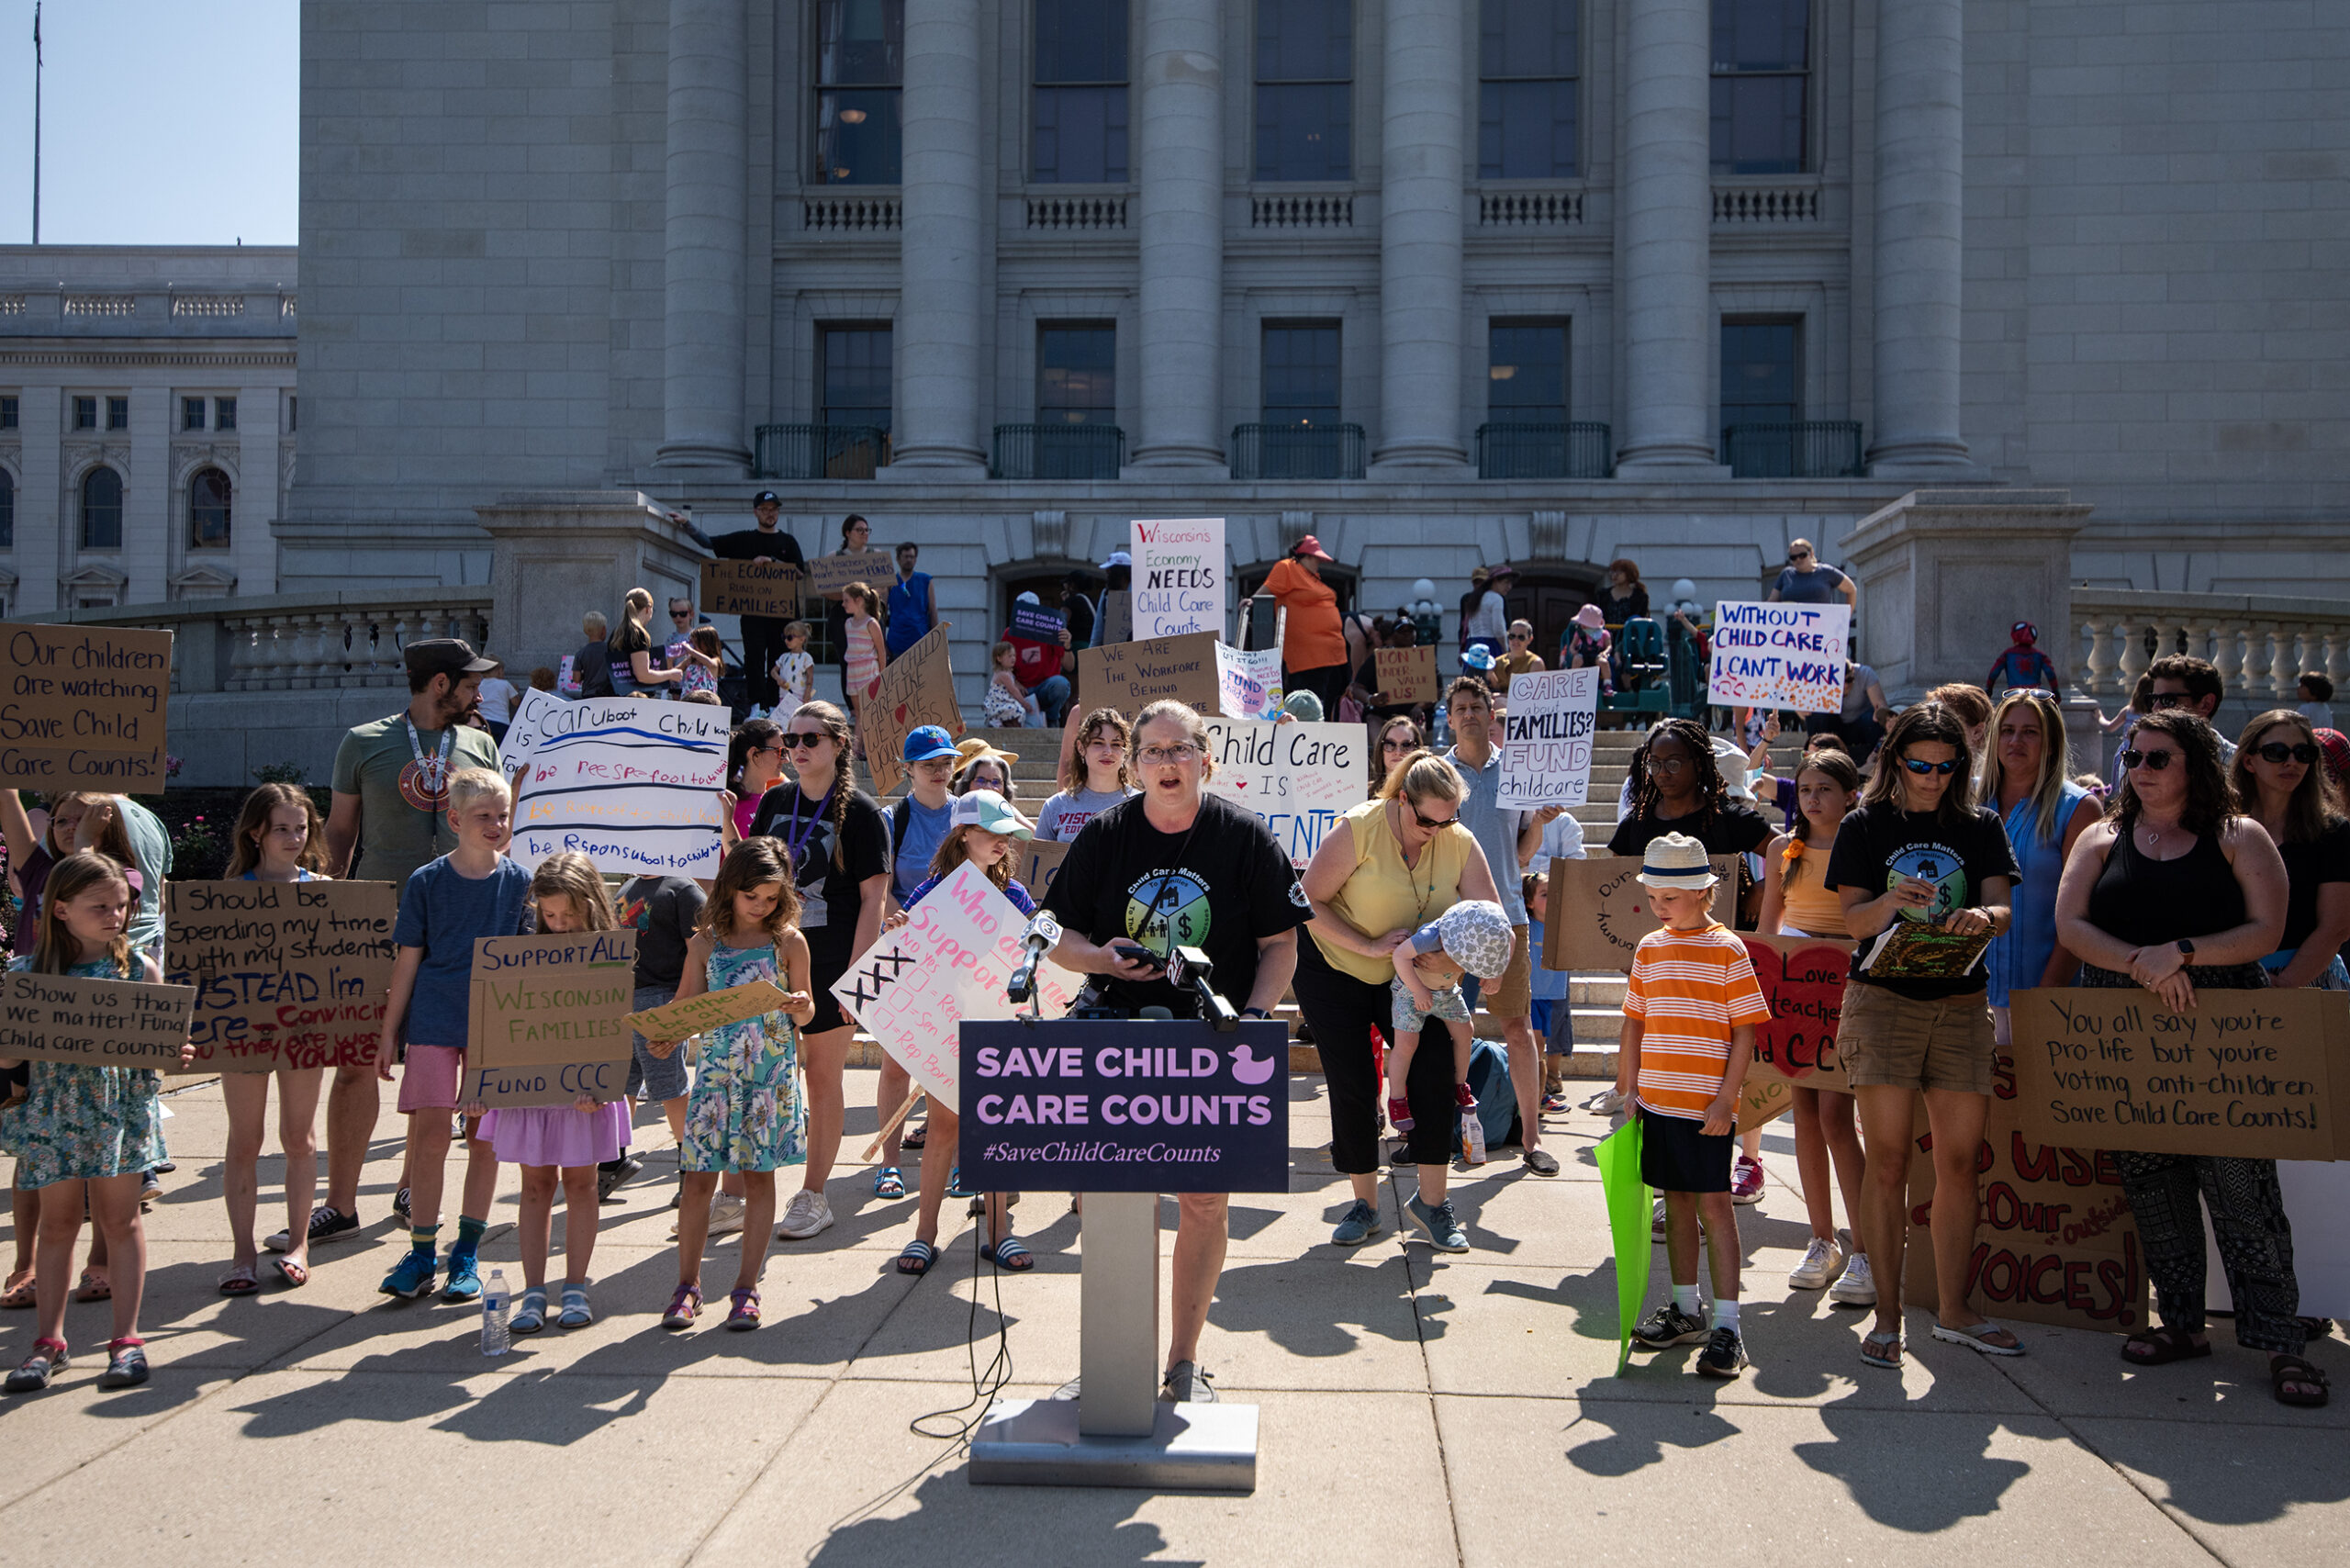 A person stands at a podium with children, parents, and others behind her holding signs.